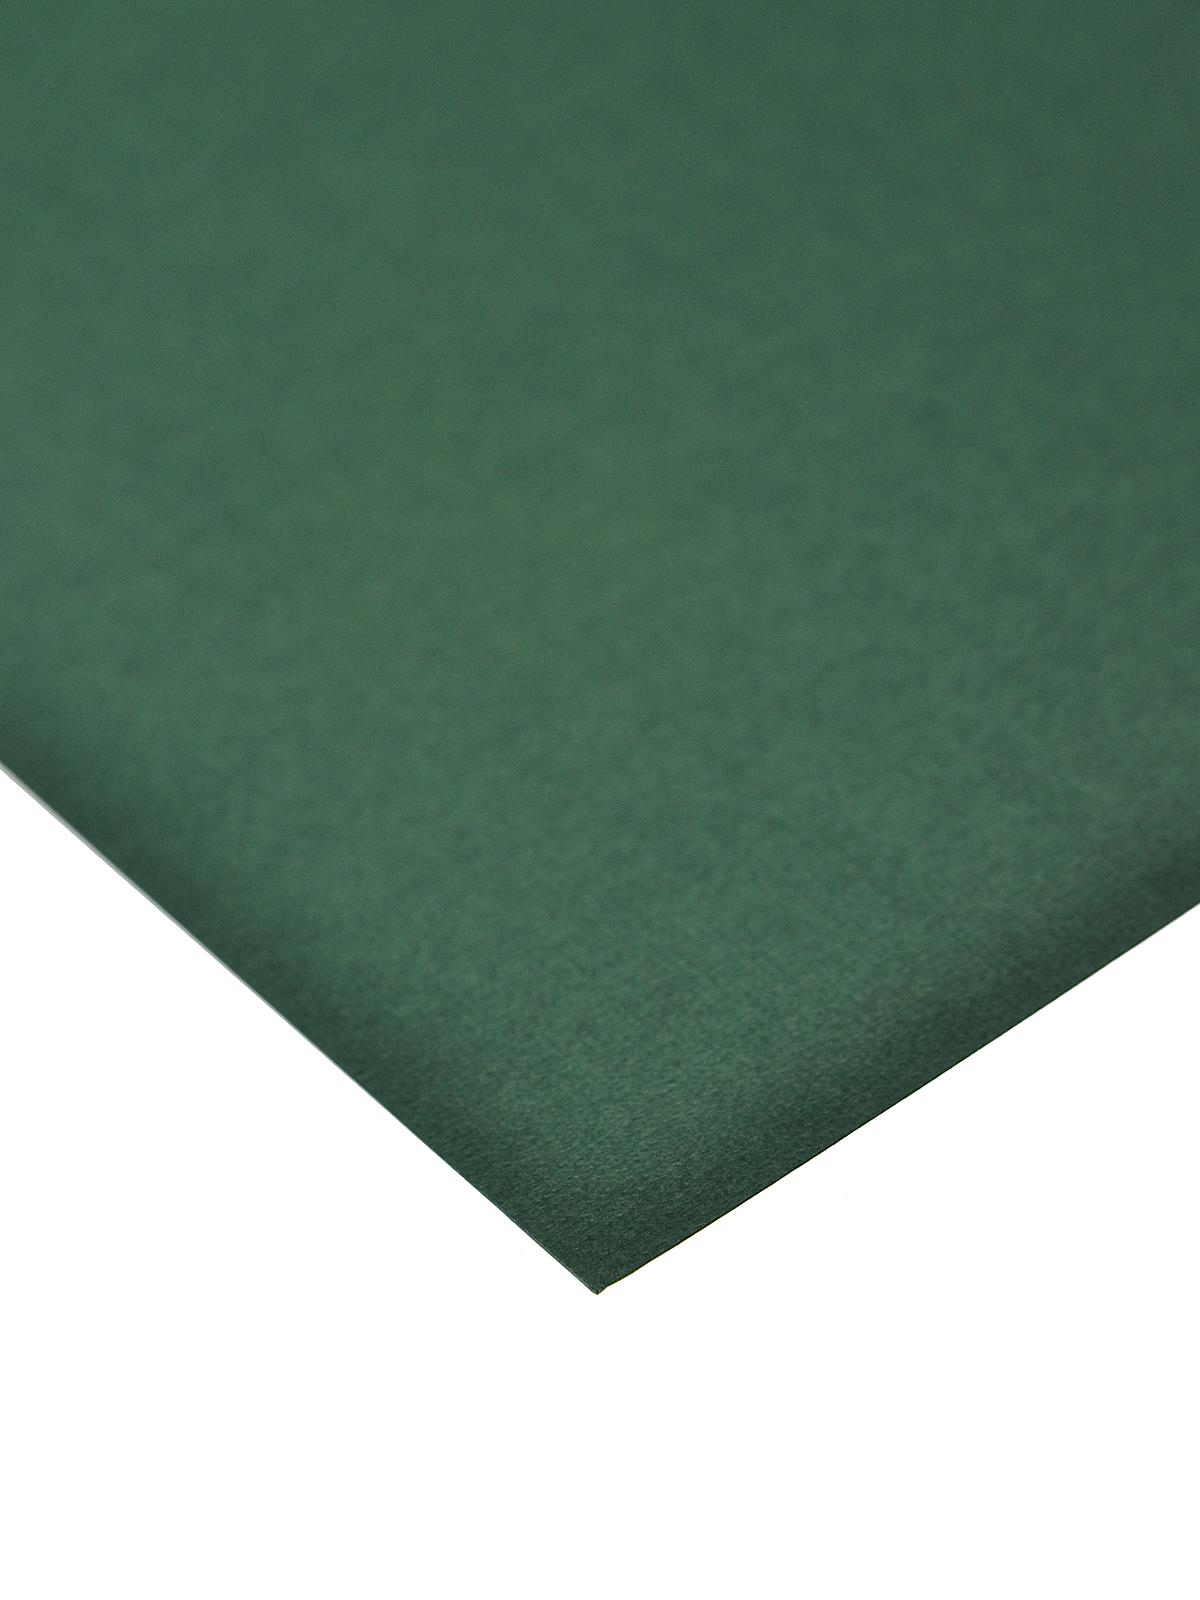 80 Lb. Canvas 8.5 In. X 11 In. Sheet Evergreen